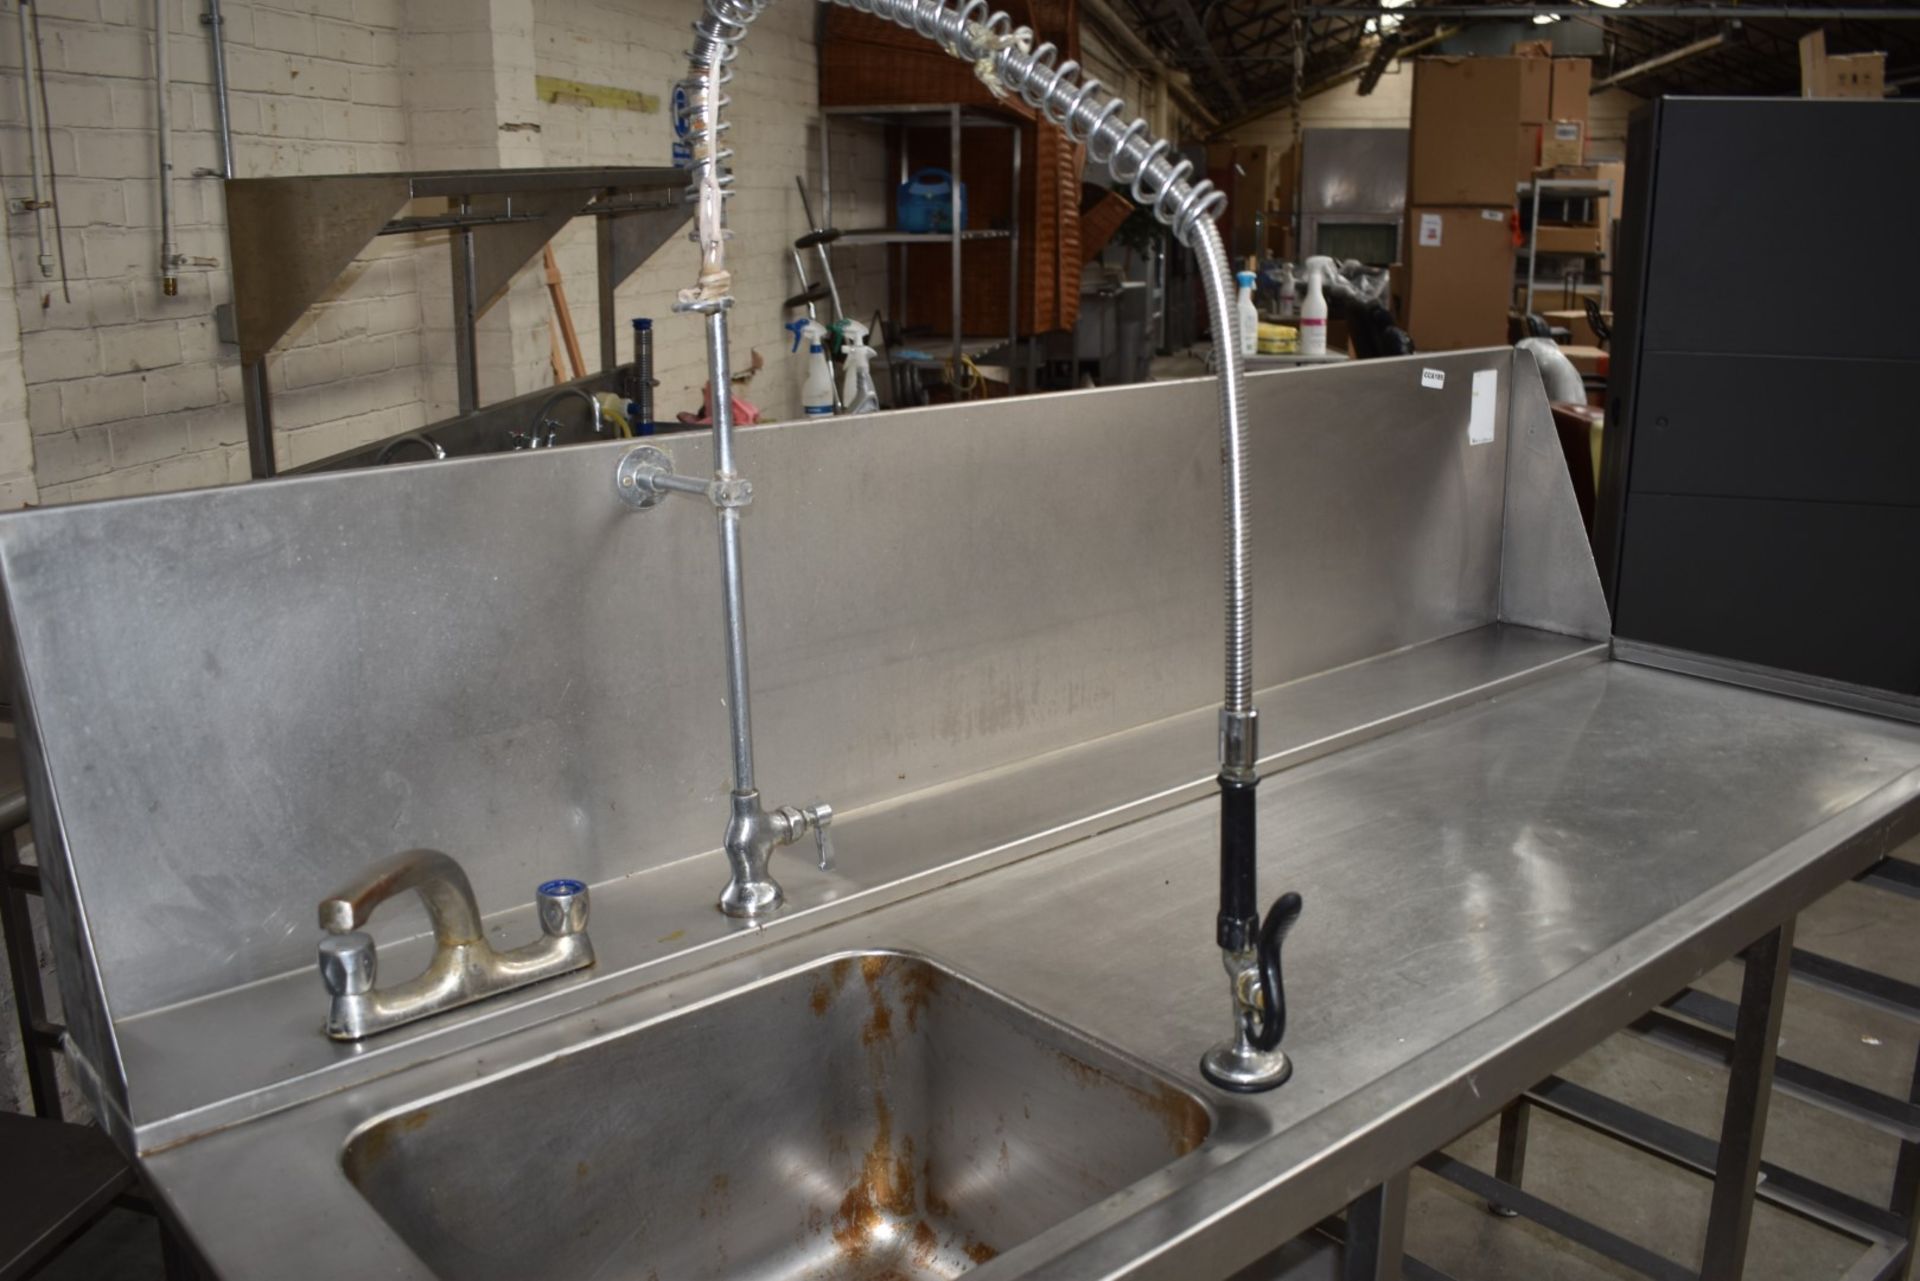 1 x Stainless Steel Passthrough Dishwasher Inlet Table Featuring Wash Basin, Mixer Tap, Hose Spray - Image 3 of 6